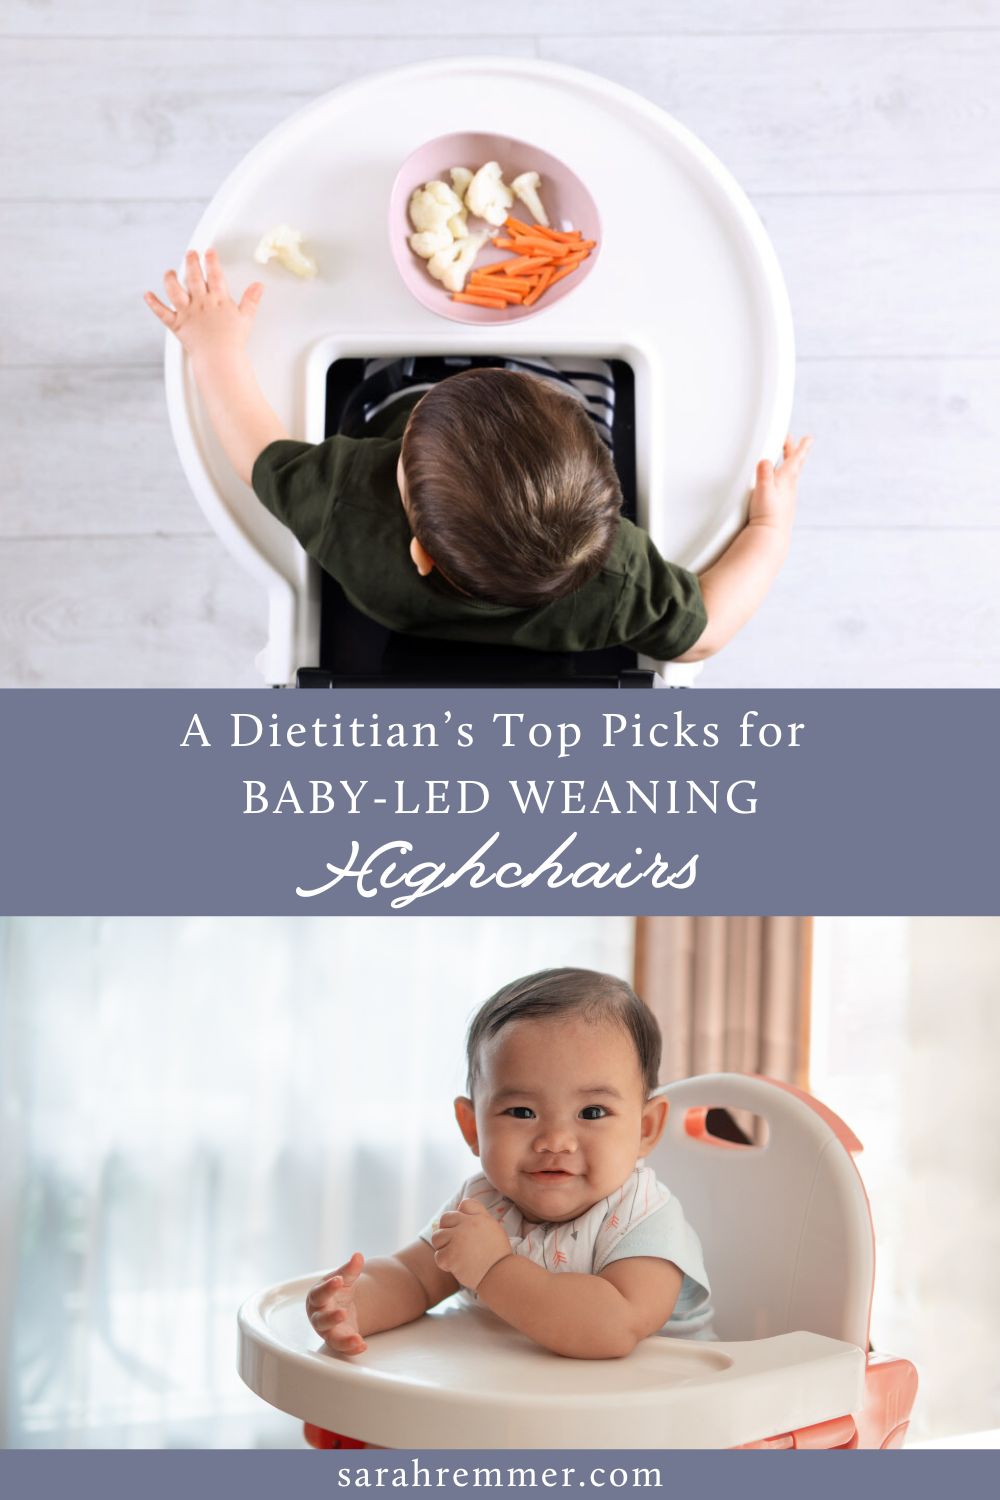 Looking for baby-led weaning highchairs? Here are dietitian-approved tips for choosing the best highchair for your little one.